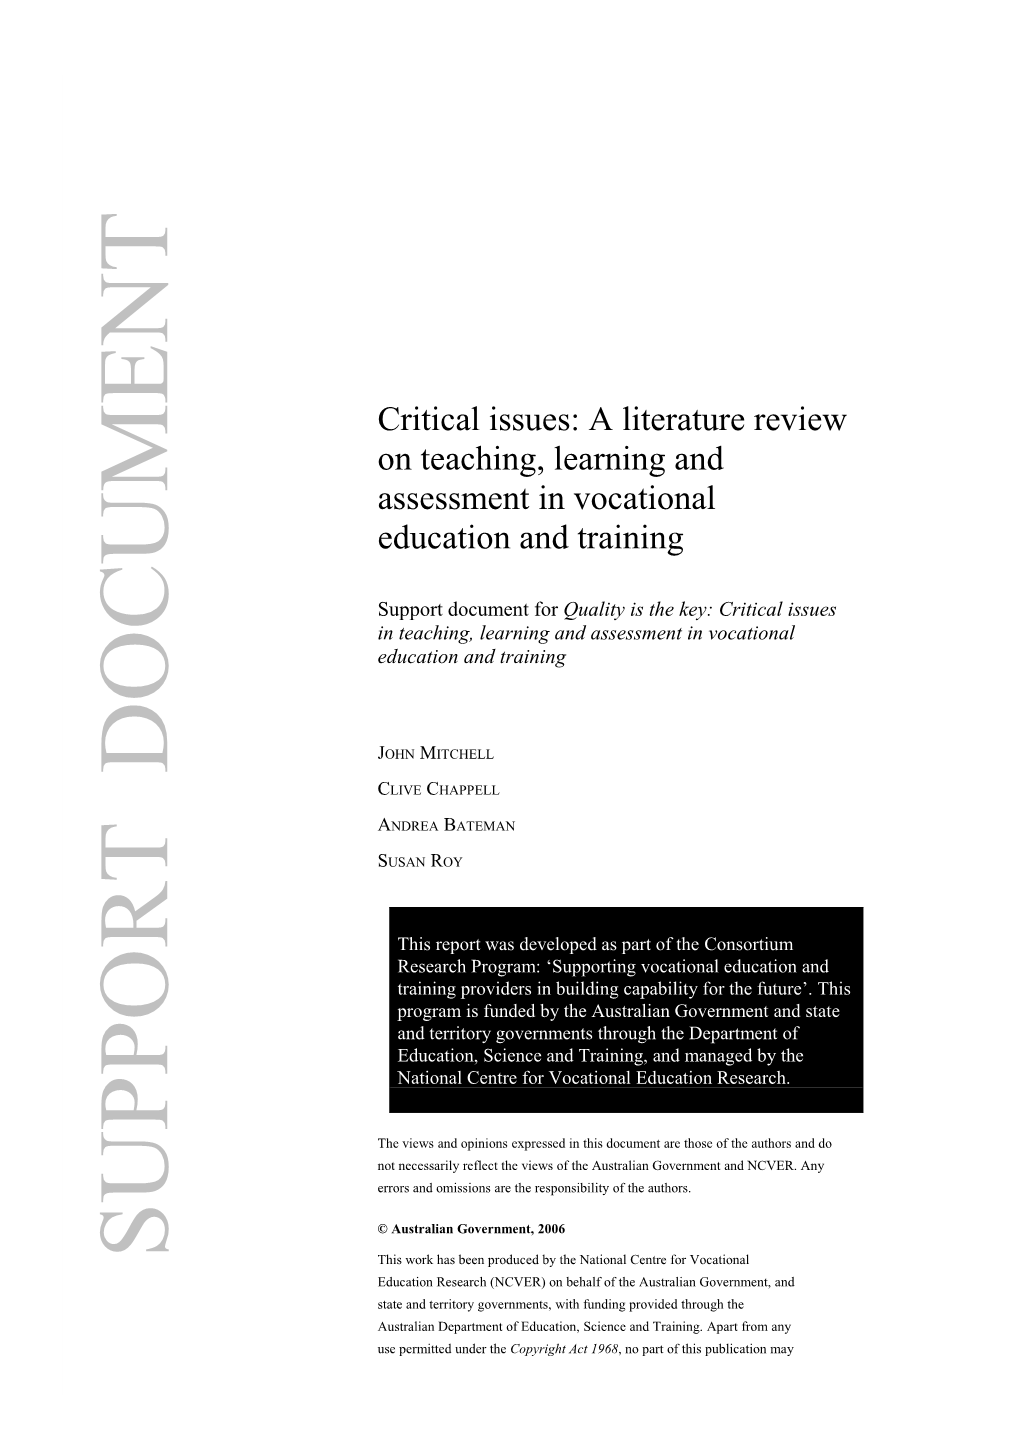 Critical Issues: a Literature Review on Teaching, Learning and Assessment in Vocational